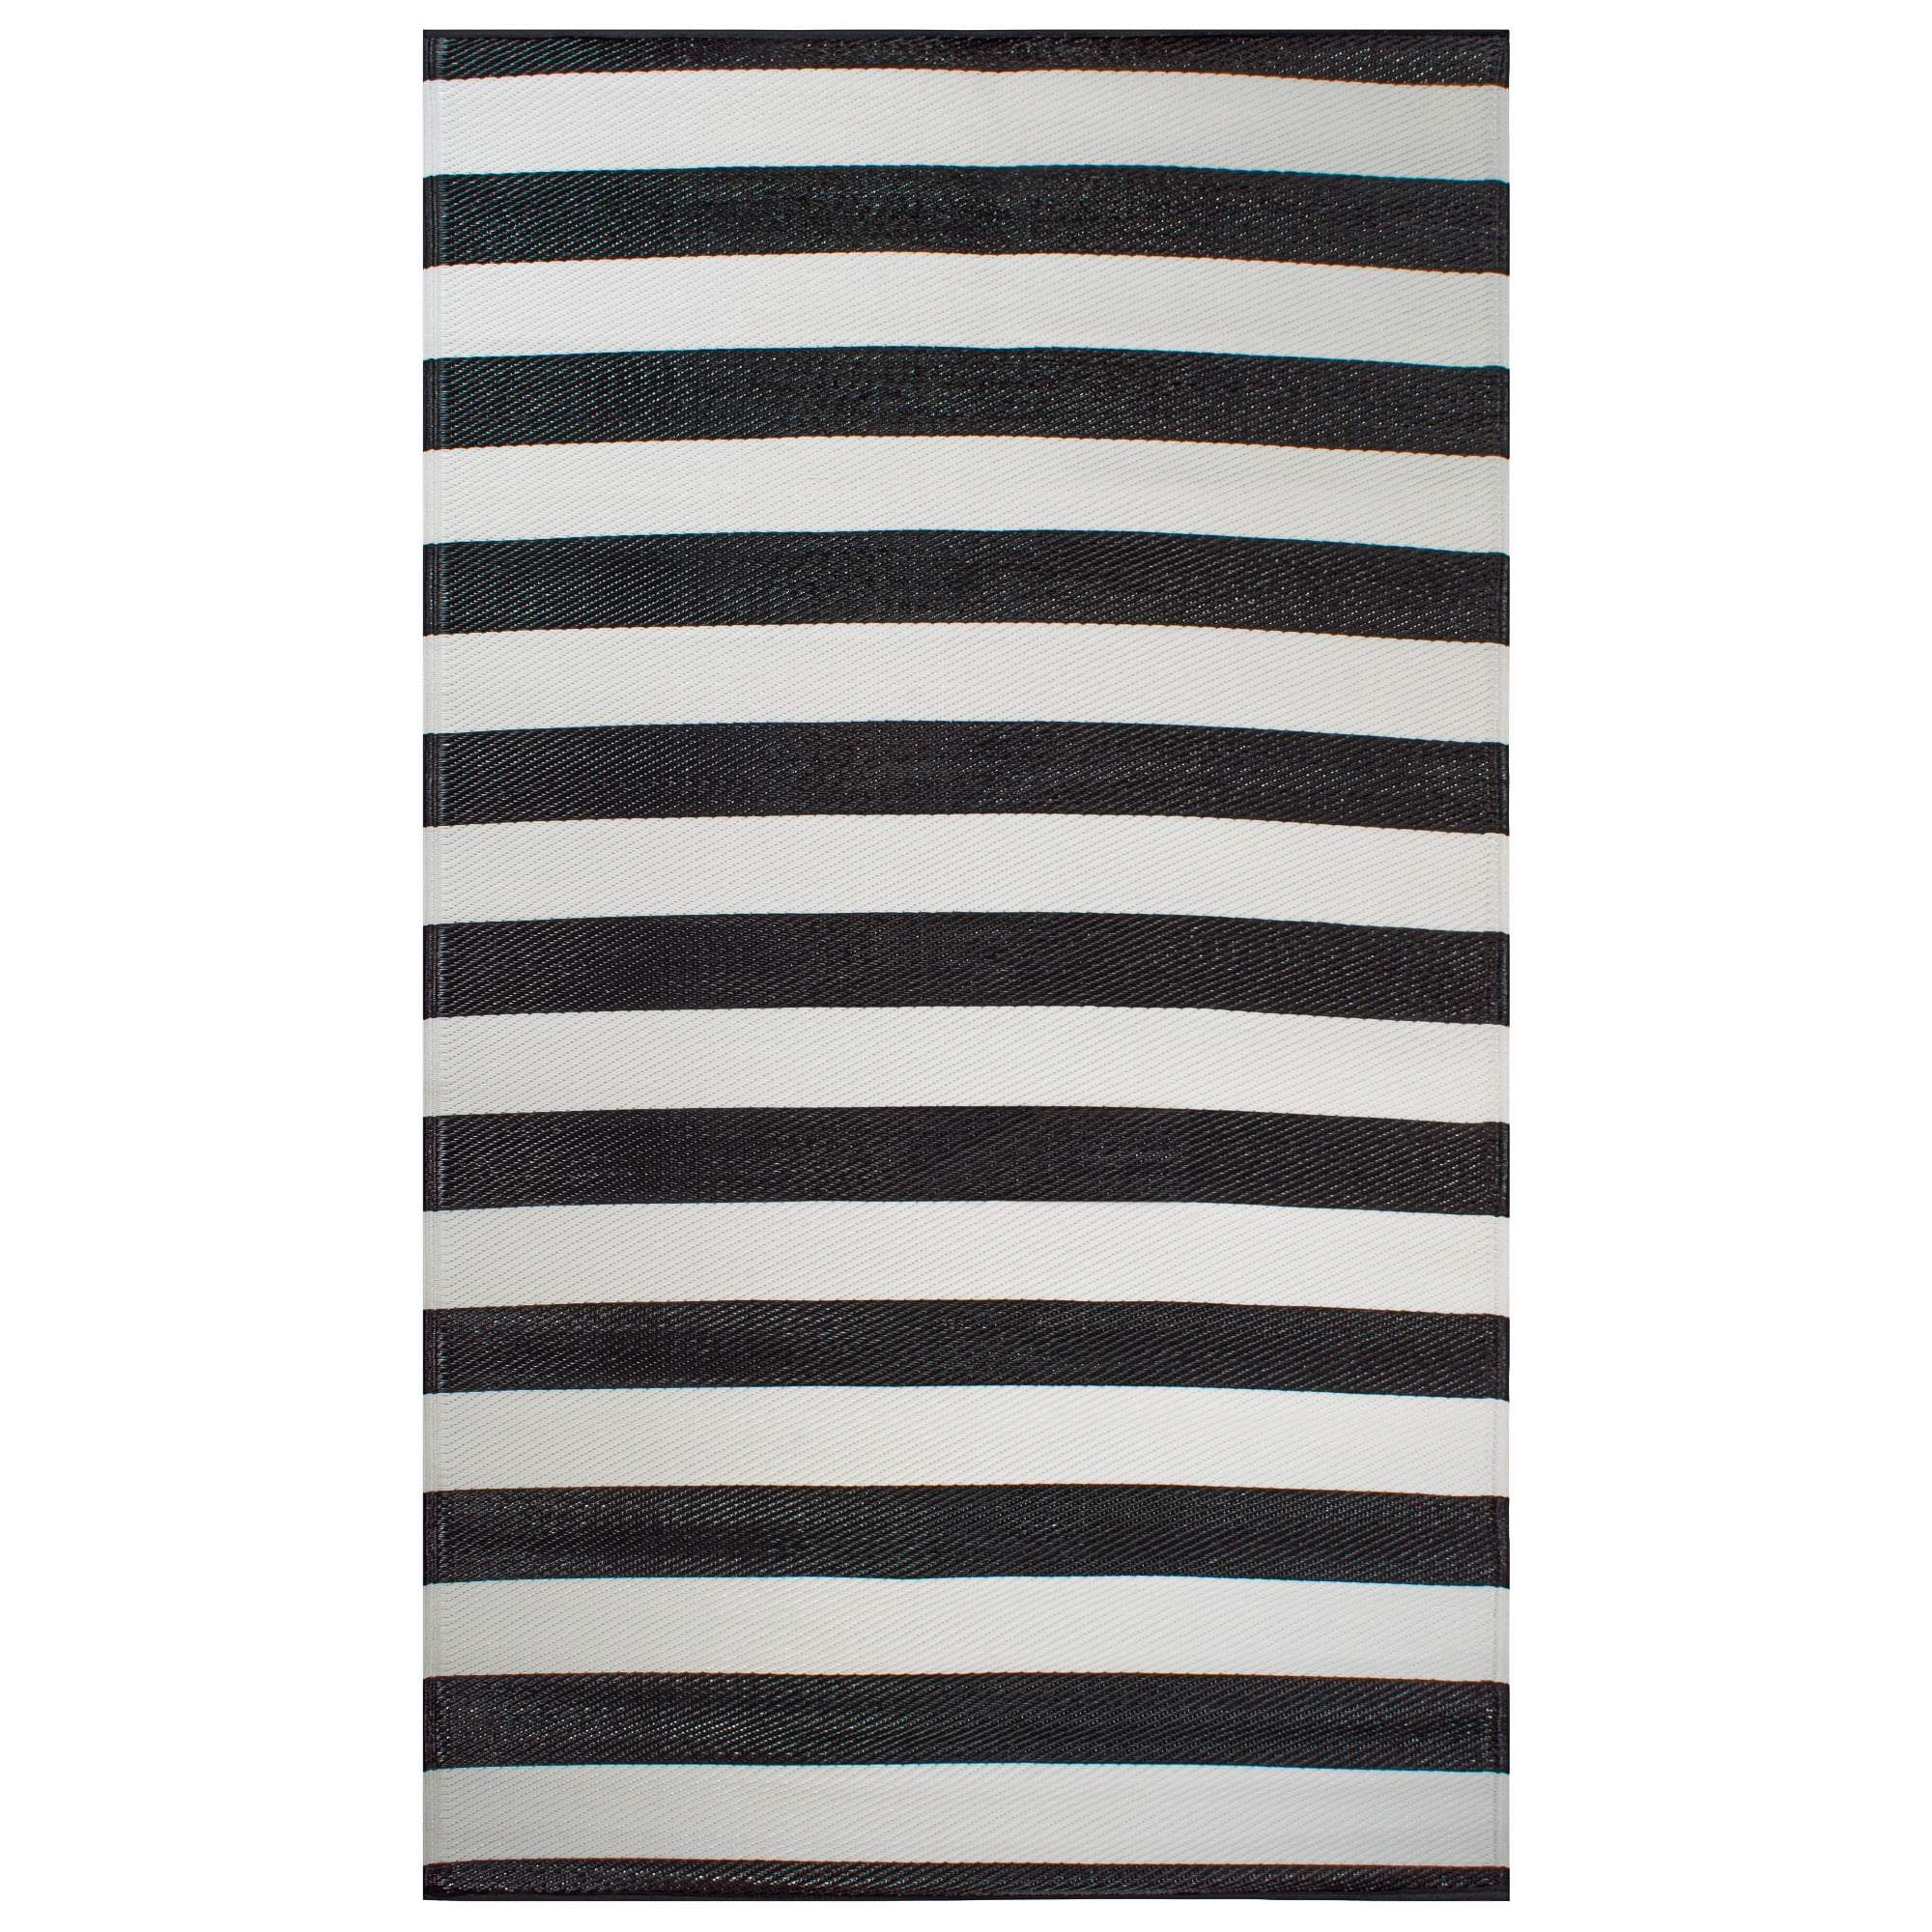 4 X 6 Black And White Rectangular, Black And White Indoor Outdoor Rug 4×6